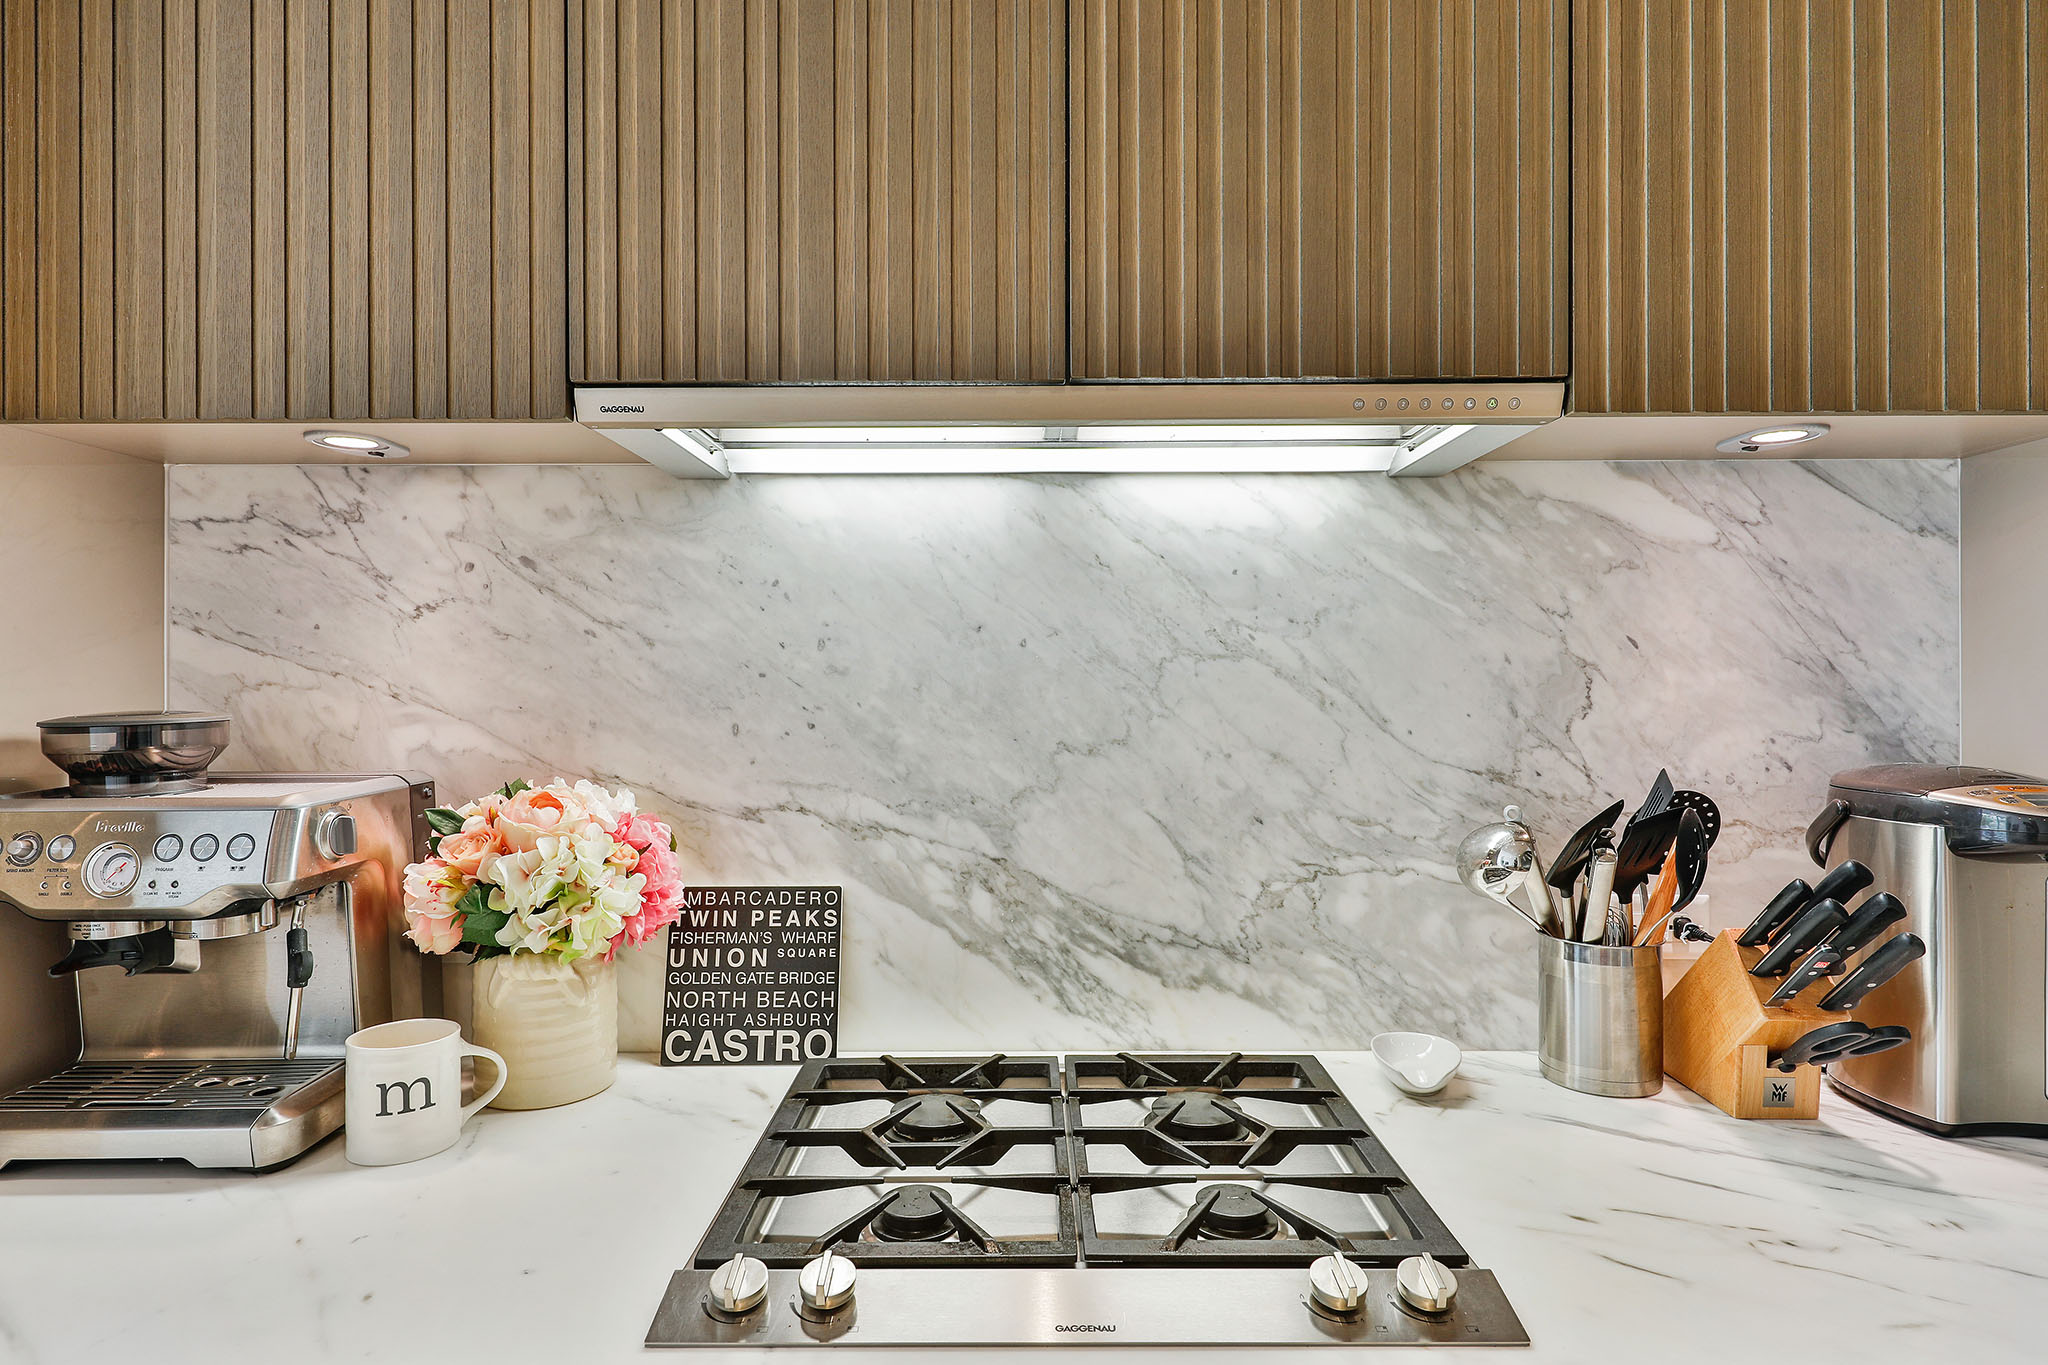 Gaggenau appliances, ArcLinea cabinetry with white marble counter & island